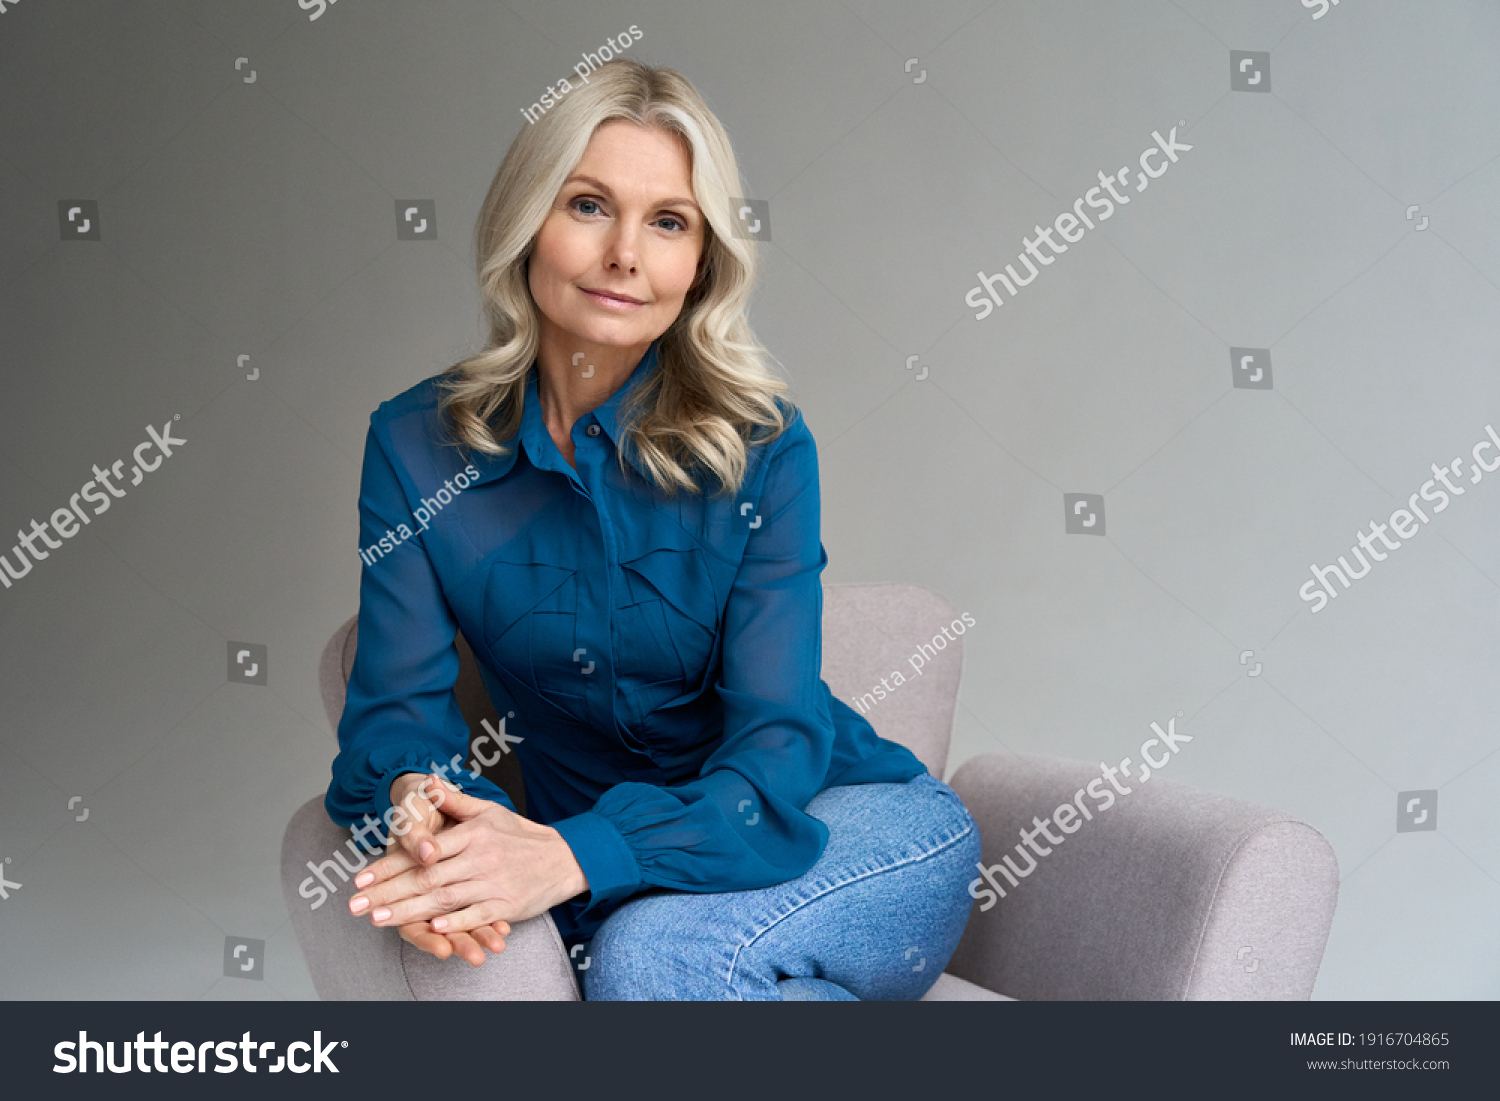 Middle aged female psychotherapist, counselor sitting in chair alone in office looking at camera. Sophisticated elegant mature 50s woman of mid age with blond hair posing indoors, portrait. #1916704865